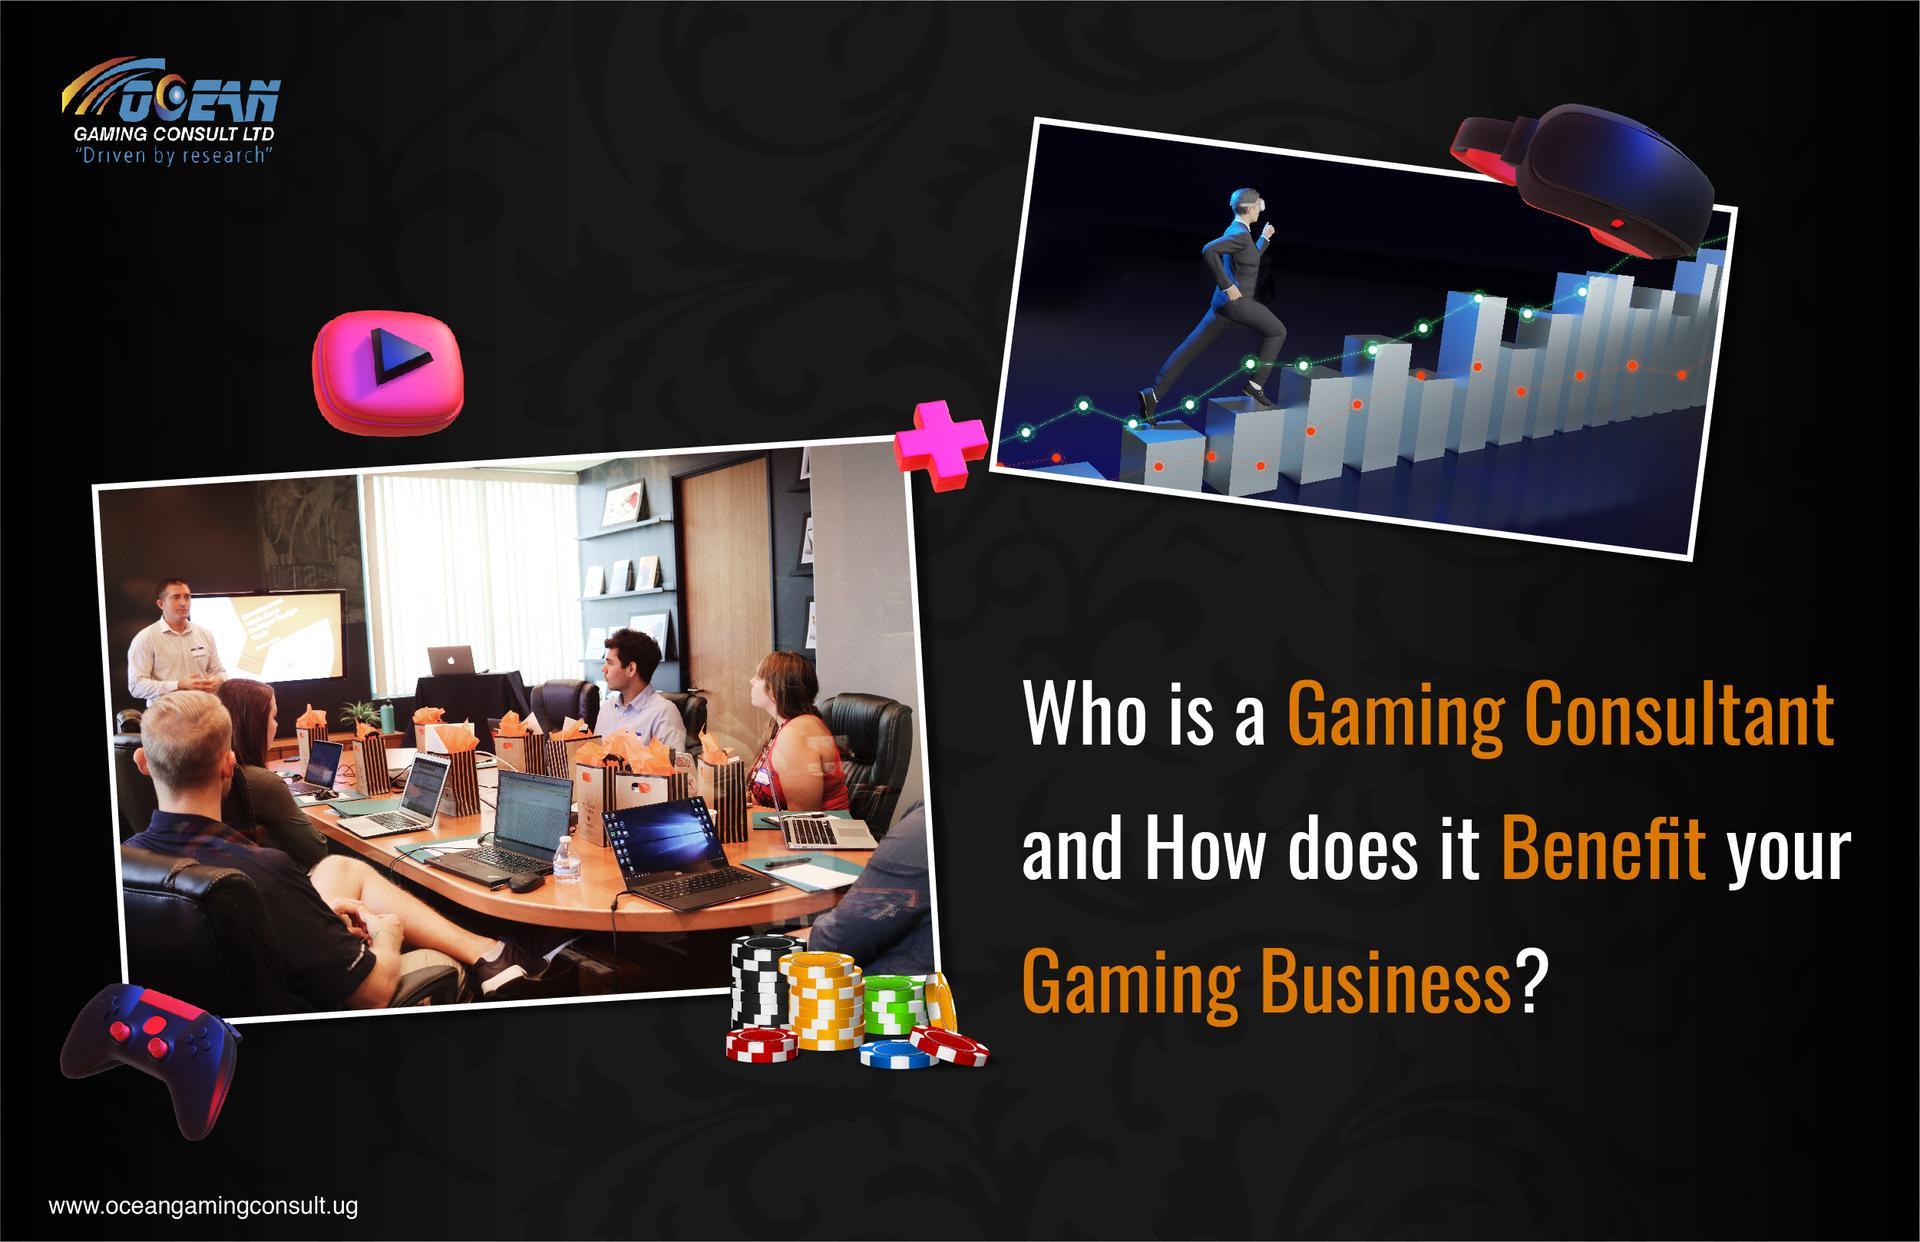 Who is a Gaming Consultant and How does it Benefit your Gaming Business?